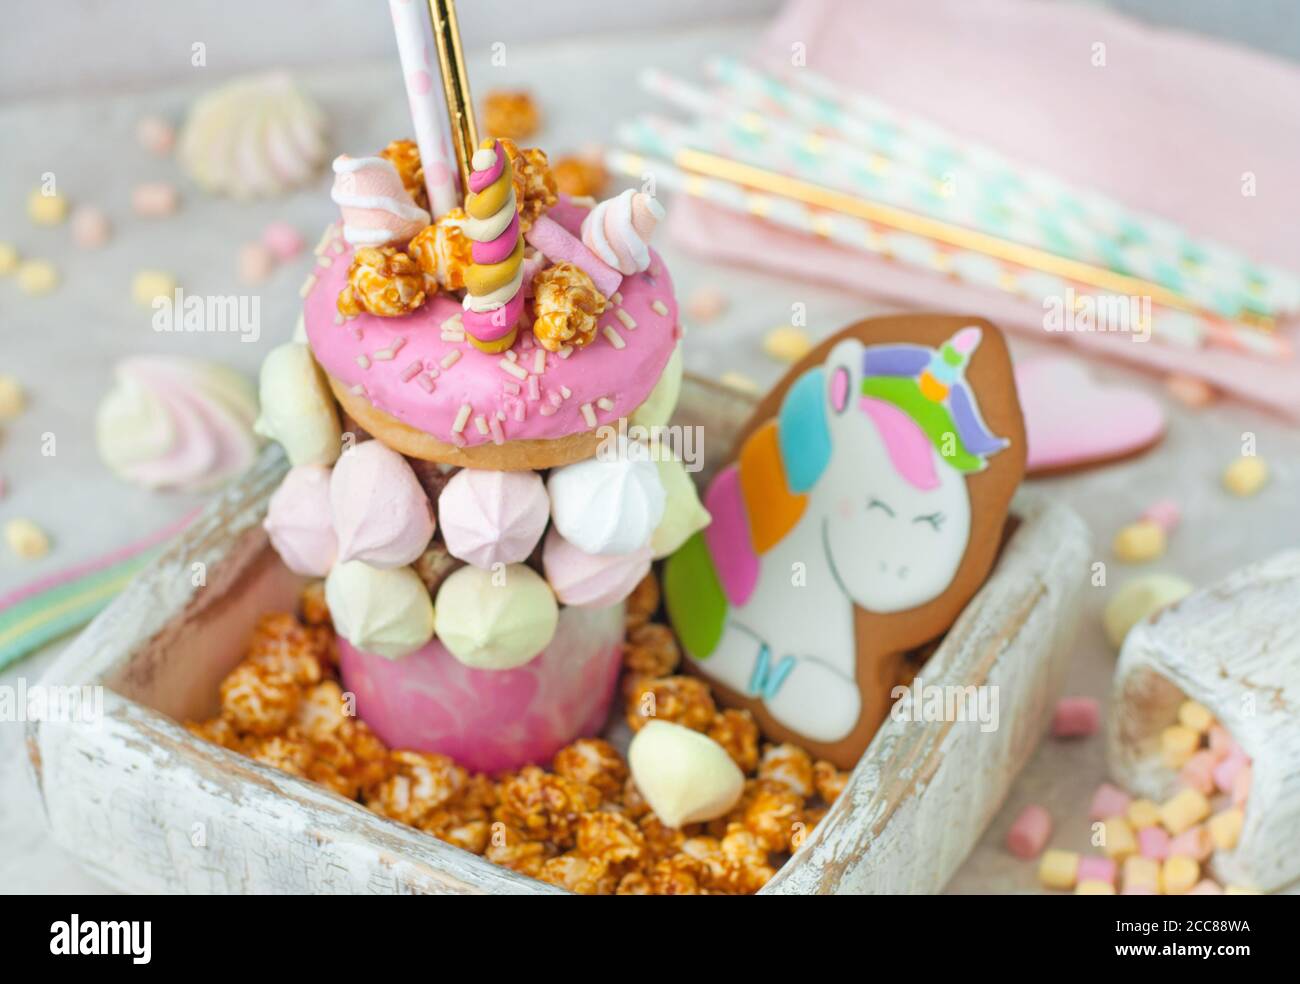 Freak shake decorated as unicorn in the wooden box filled with popcorn Stock Photo